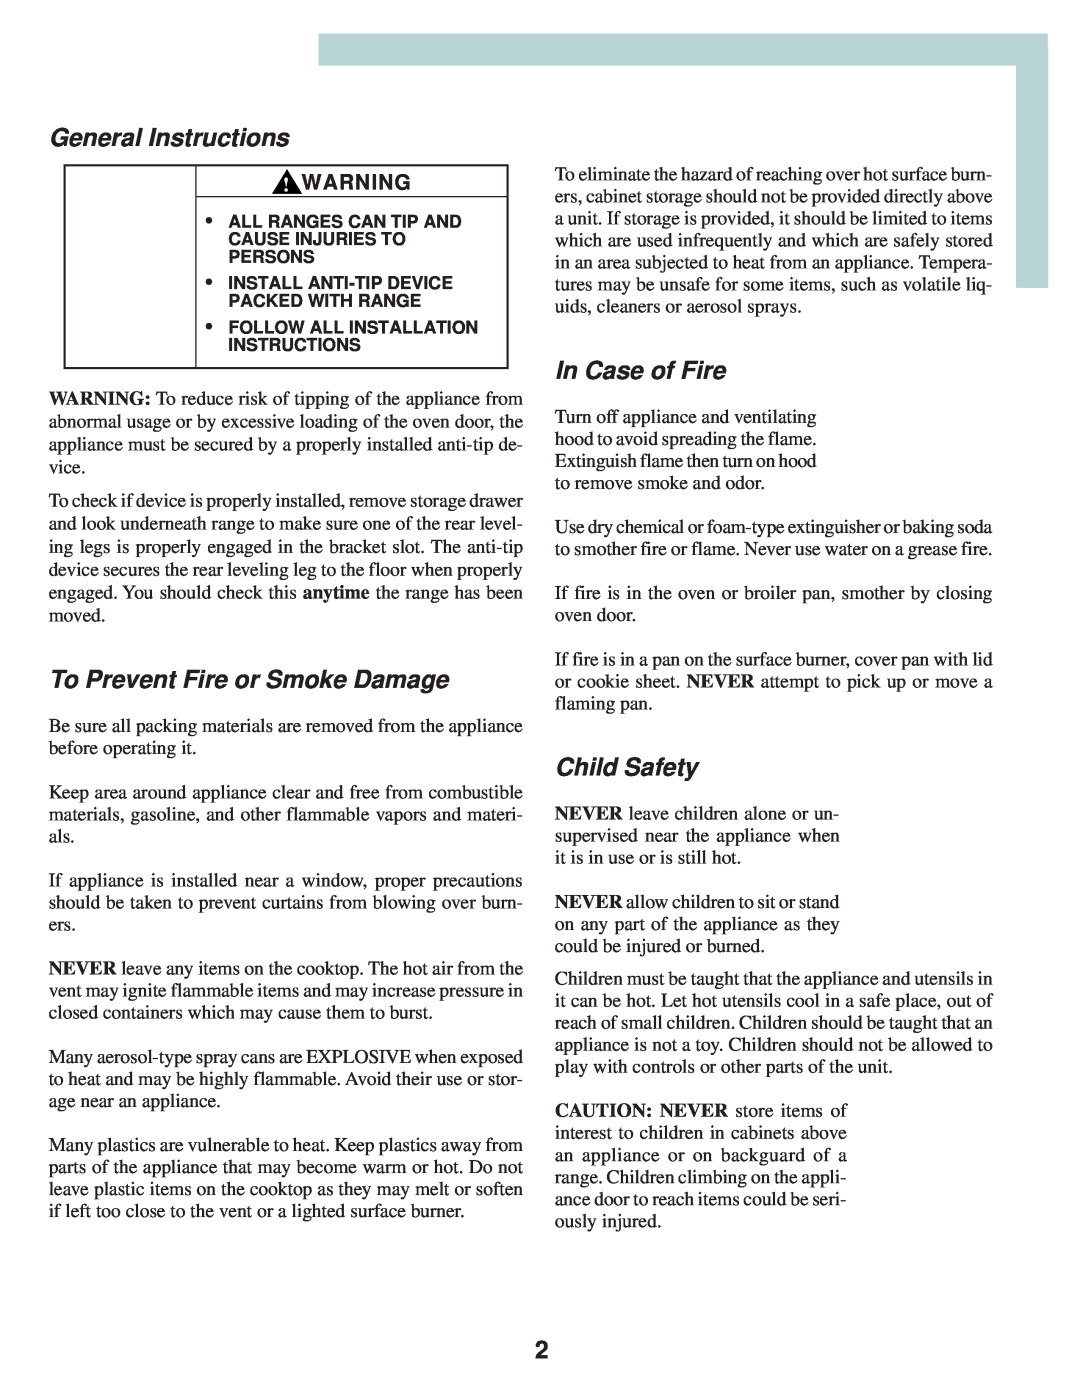 Maytag T2 warranty General Instructions, To Prevent Fire or Smoke Damage, In Case of Fire, Child Safety 